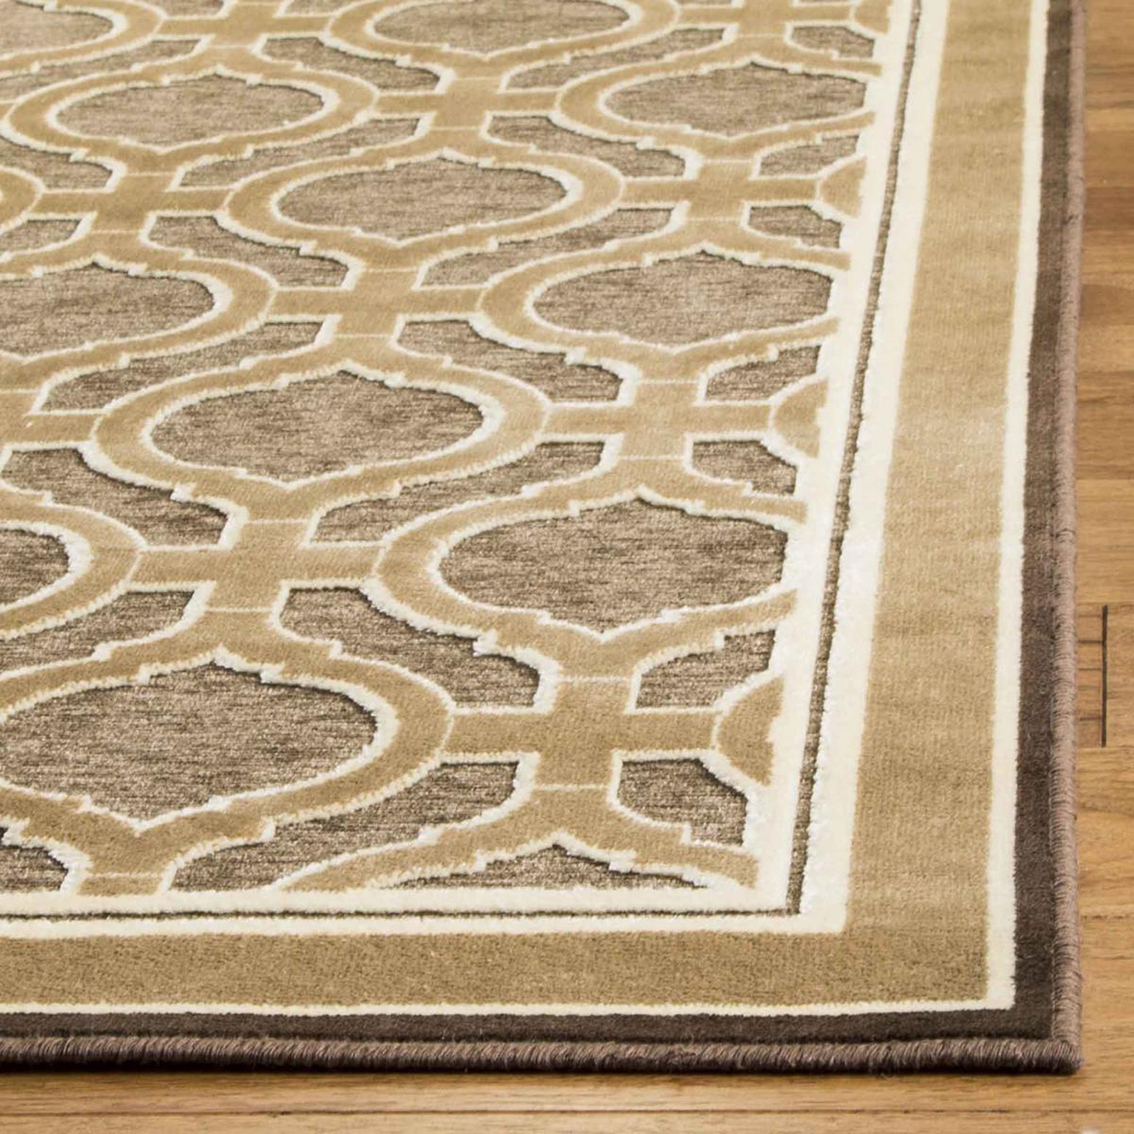 Martha Stewart Collection 4445 Area Rug - Image 2 of 3